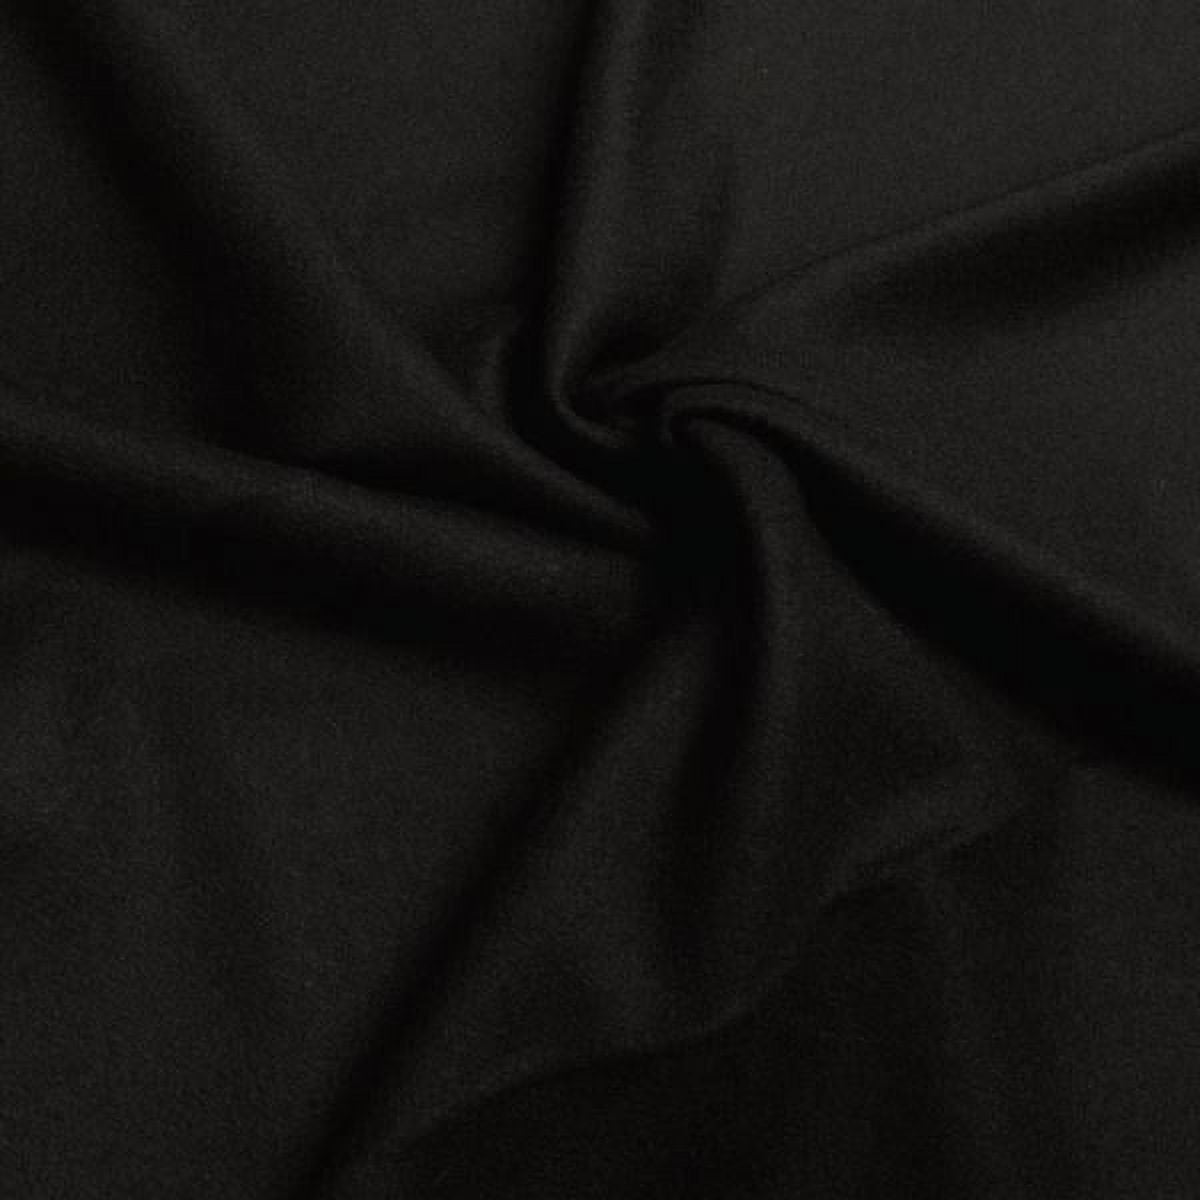 WAFASSZD 5 Yard Black Cotton Fabric,Natural Cotton Poplin Fabric by The Yard,Black Fabric,59 Inches Wide 100% Cotton Fabric,Soft Embroidery Muslin Quilting